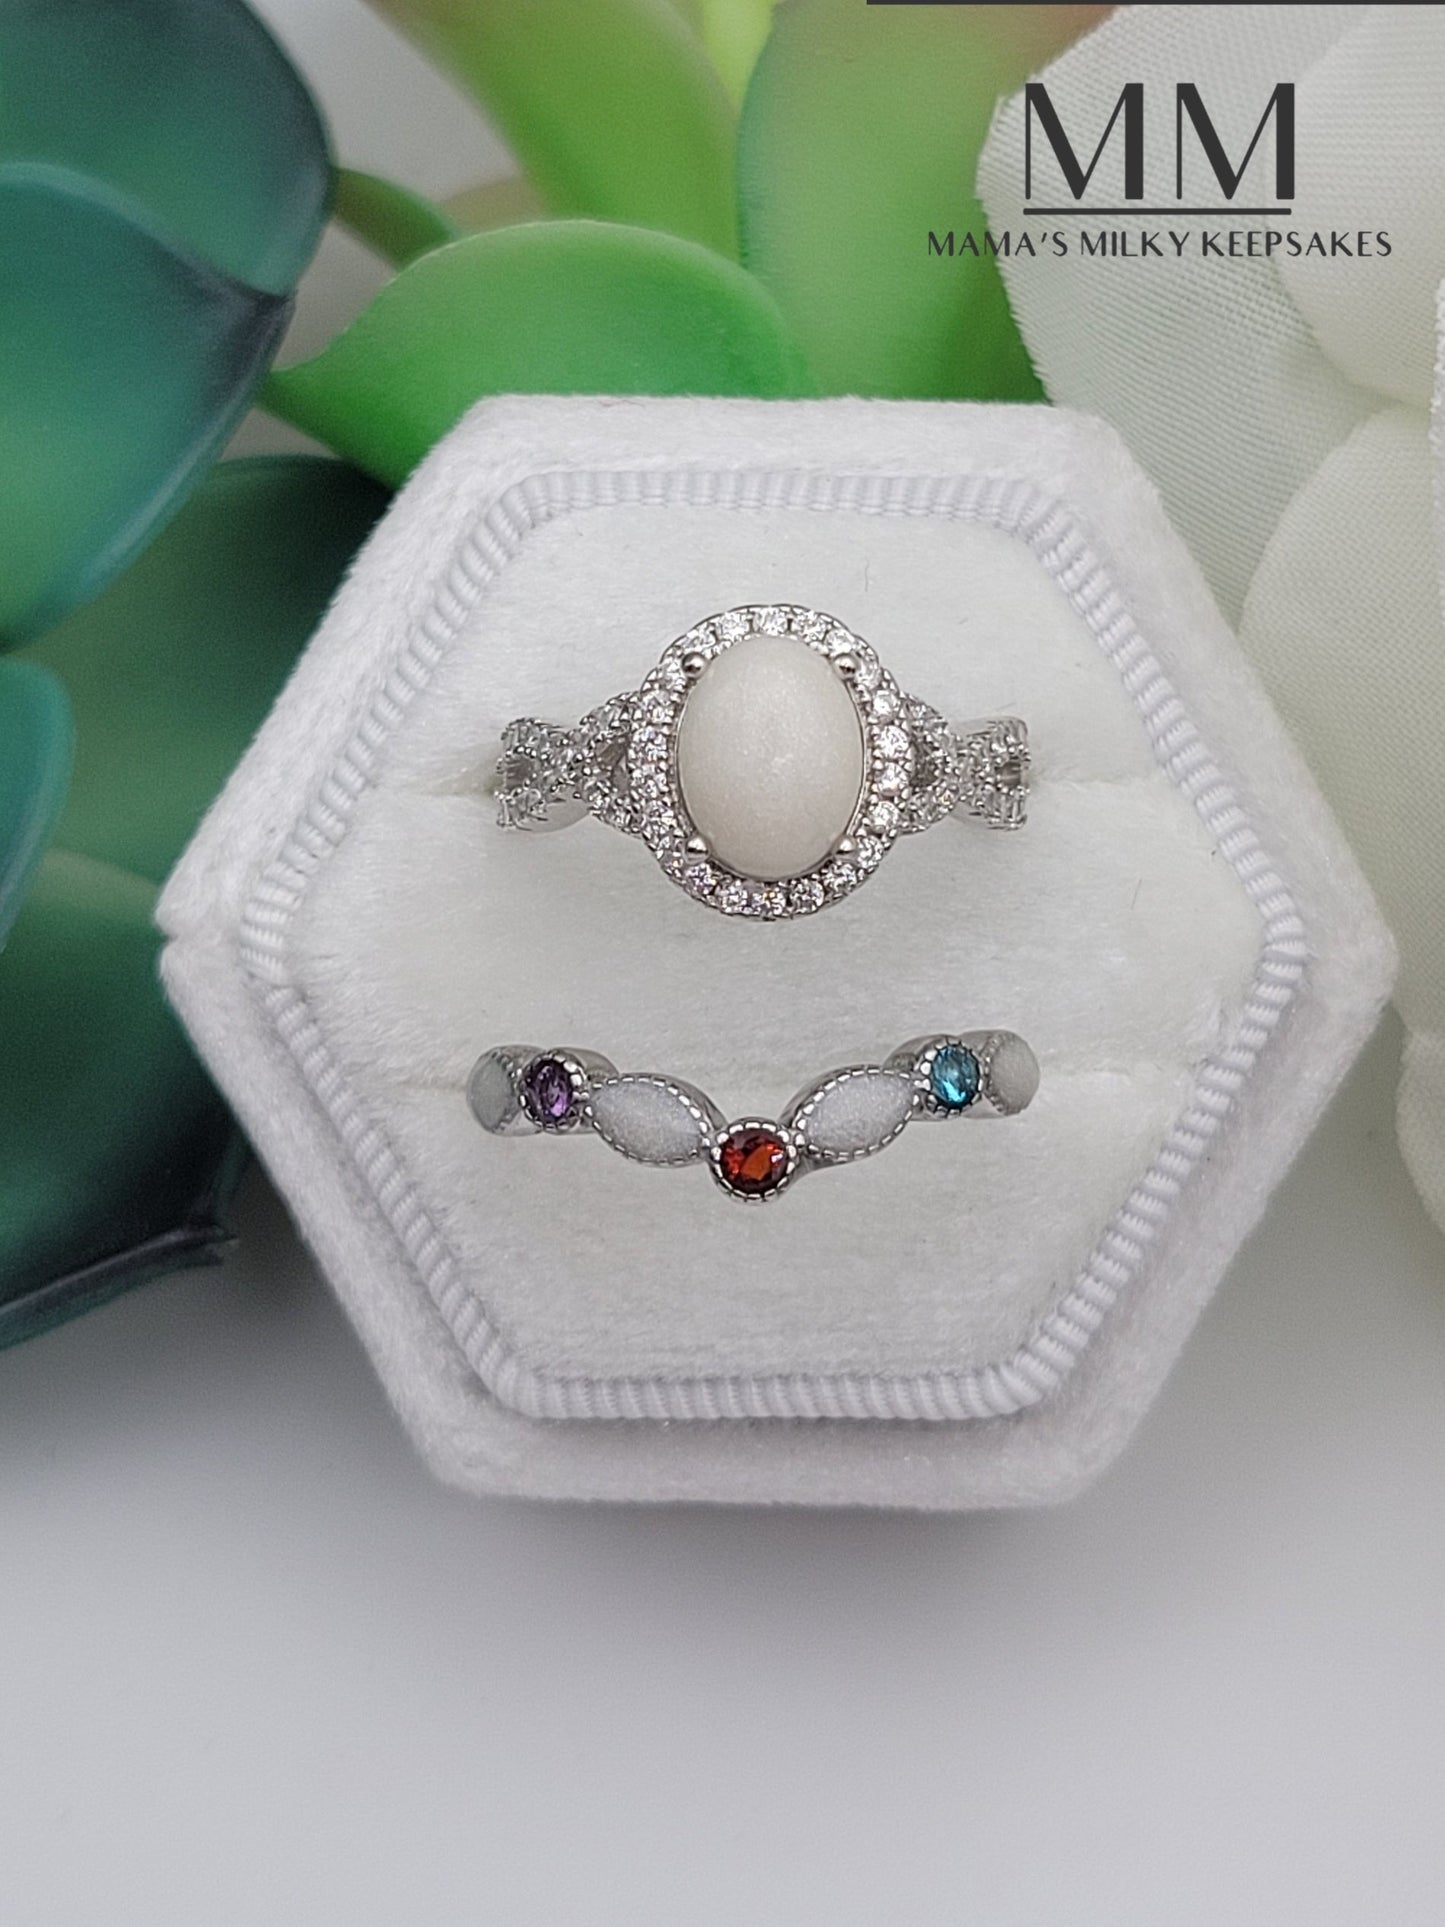 Breastmilk Oval Ring Set, Cremation Oval Ring Set, Keepsake Oval Ring Set, Sterling Silver Oval Ring Set, Hair Oval Ring Set, Ash Oval Ring Set, Umbilical Cord Oval Ring Set, BreastmilkJewelry Oval Ring Set DIY Oval Ring Set